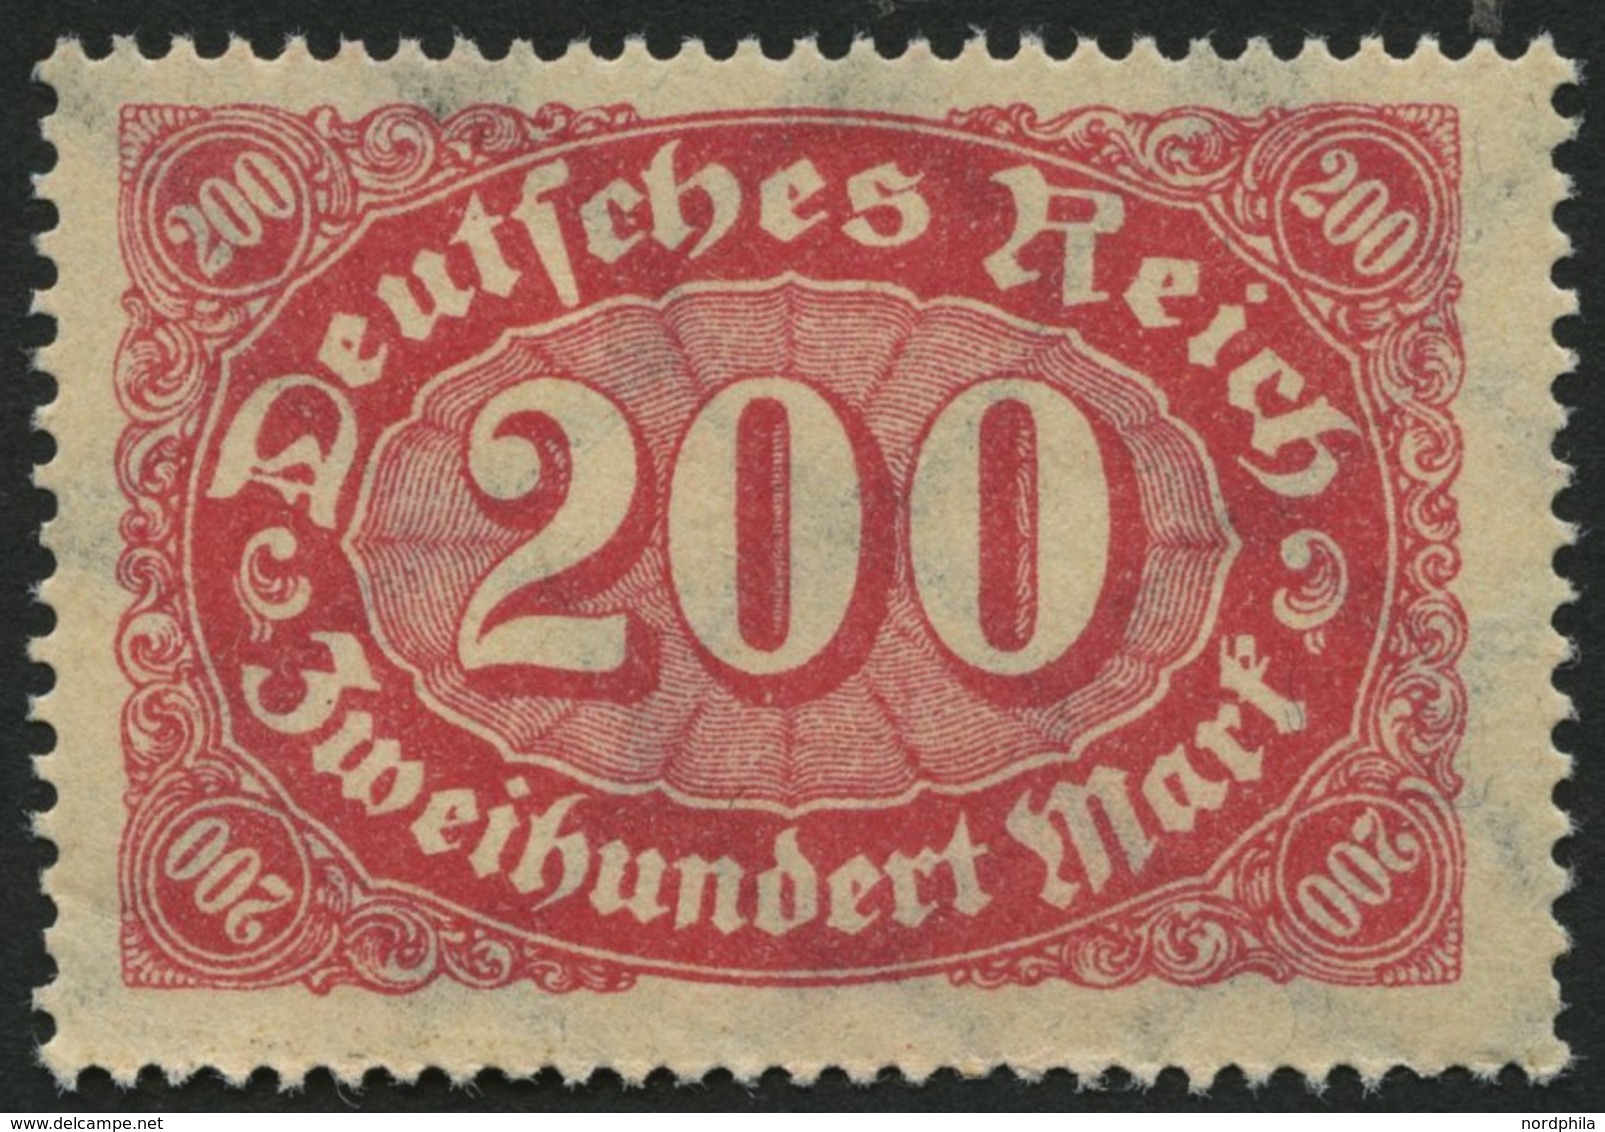 Dt. Reich 248b **, 1923, 200 M. Rotlila, Pracht, Gepr. Infla, Mi. 90.- - Used Stamps